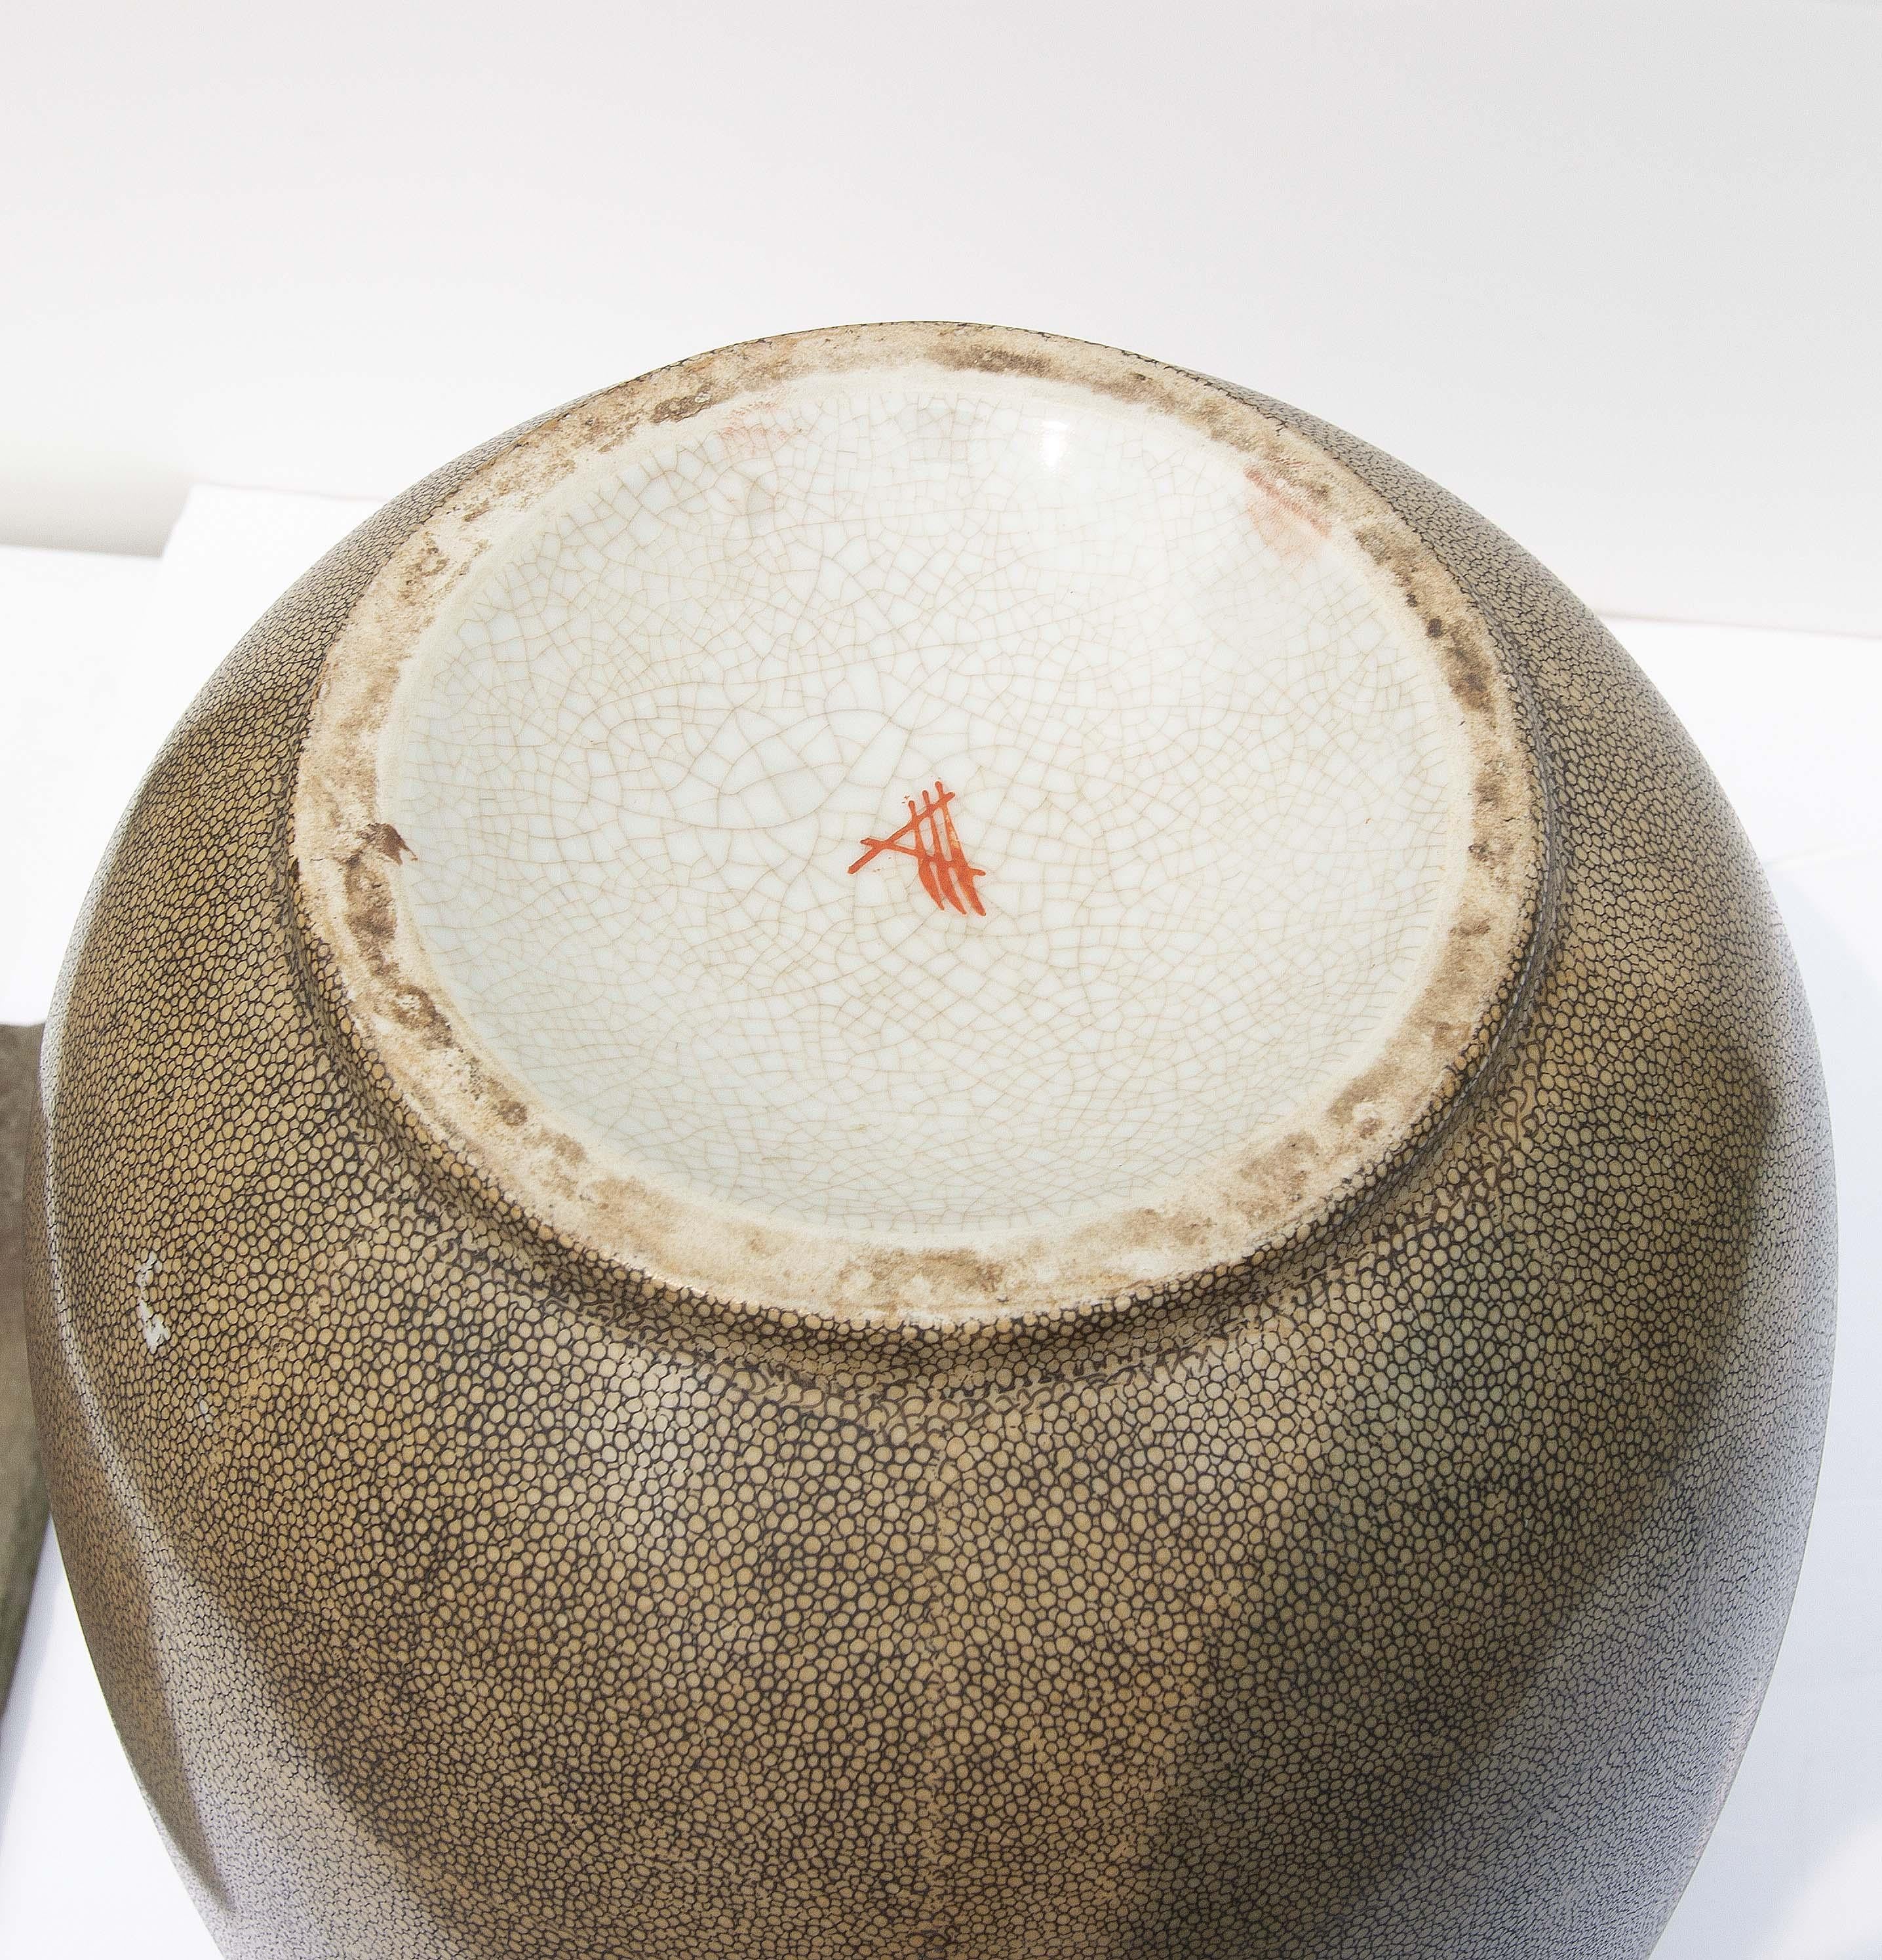 Ceramic Asian vase with shagreen glaze. Can also be used as a lamp base.